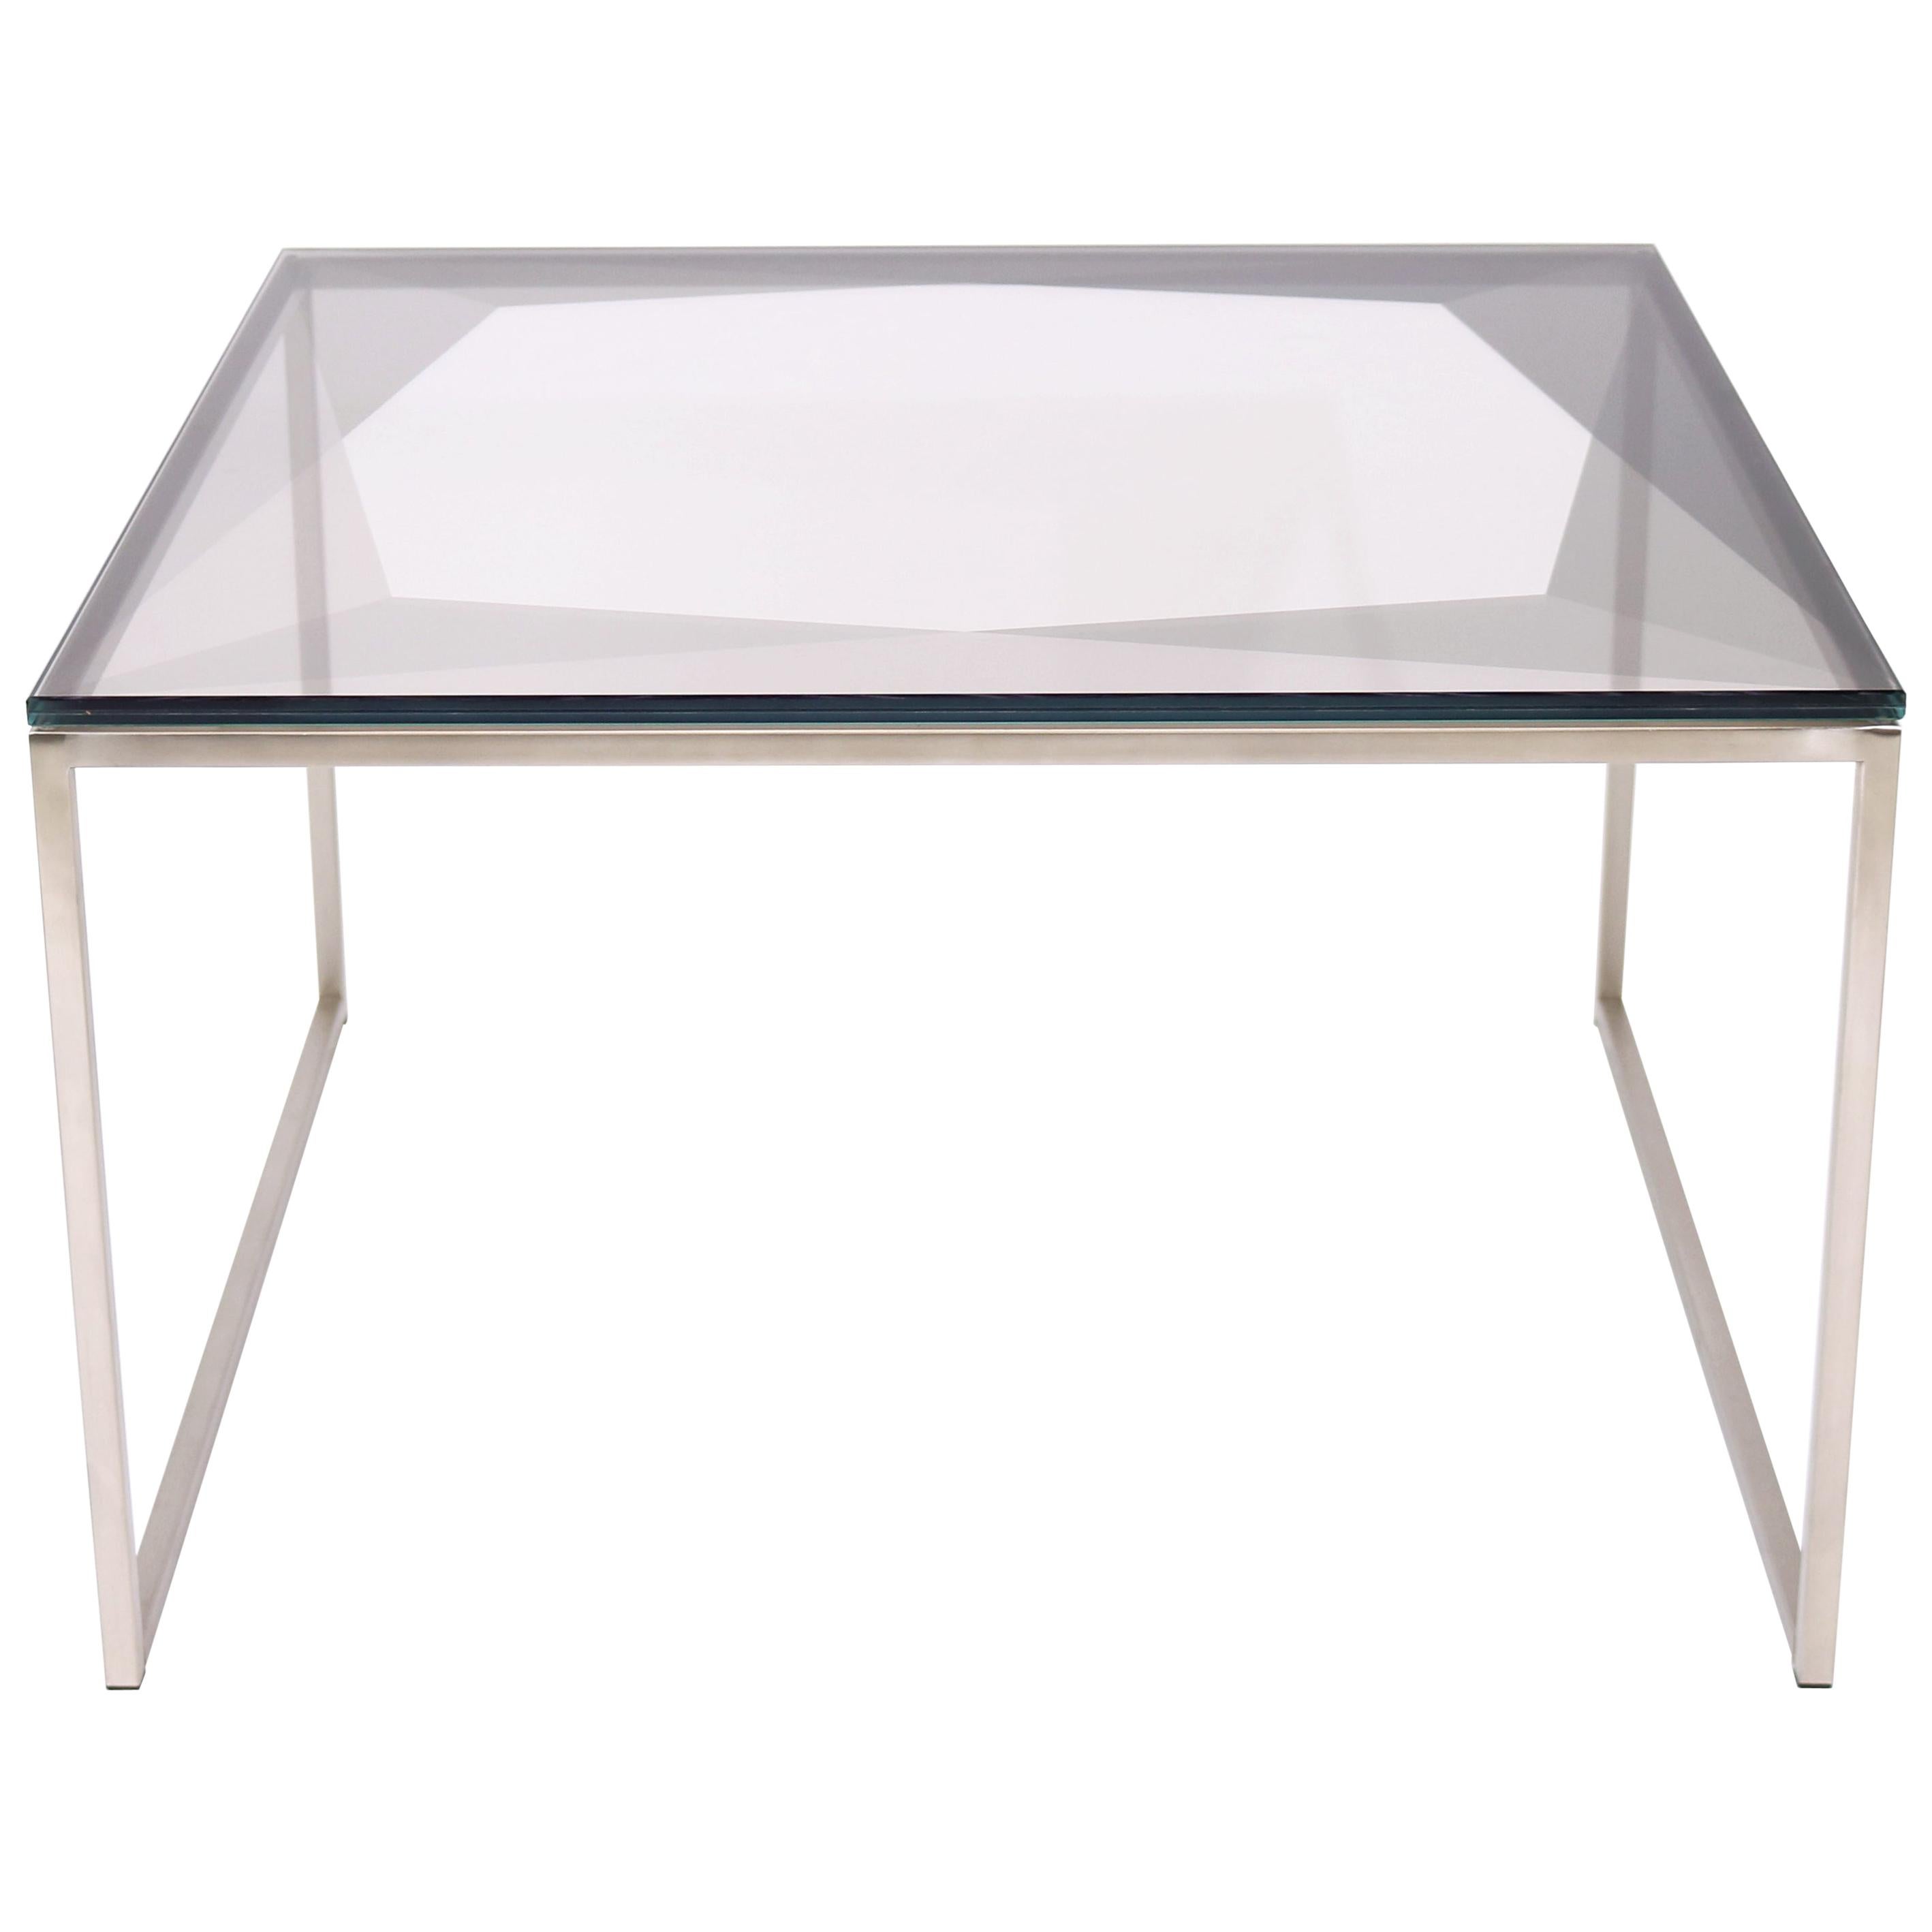 Gem Coffee Table Gray Glass with Nickel Base by Debra Folz For Sale